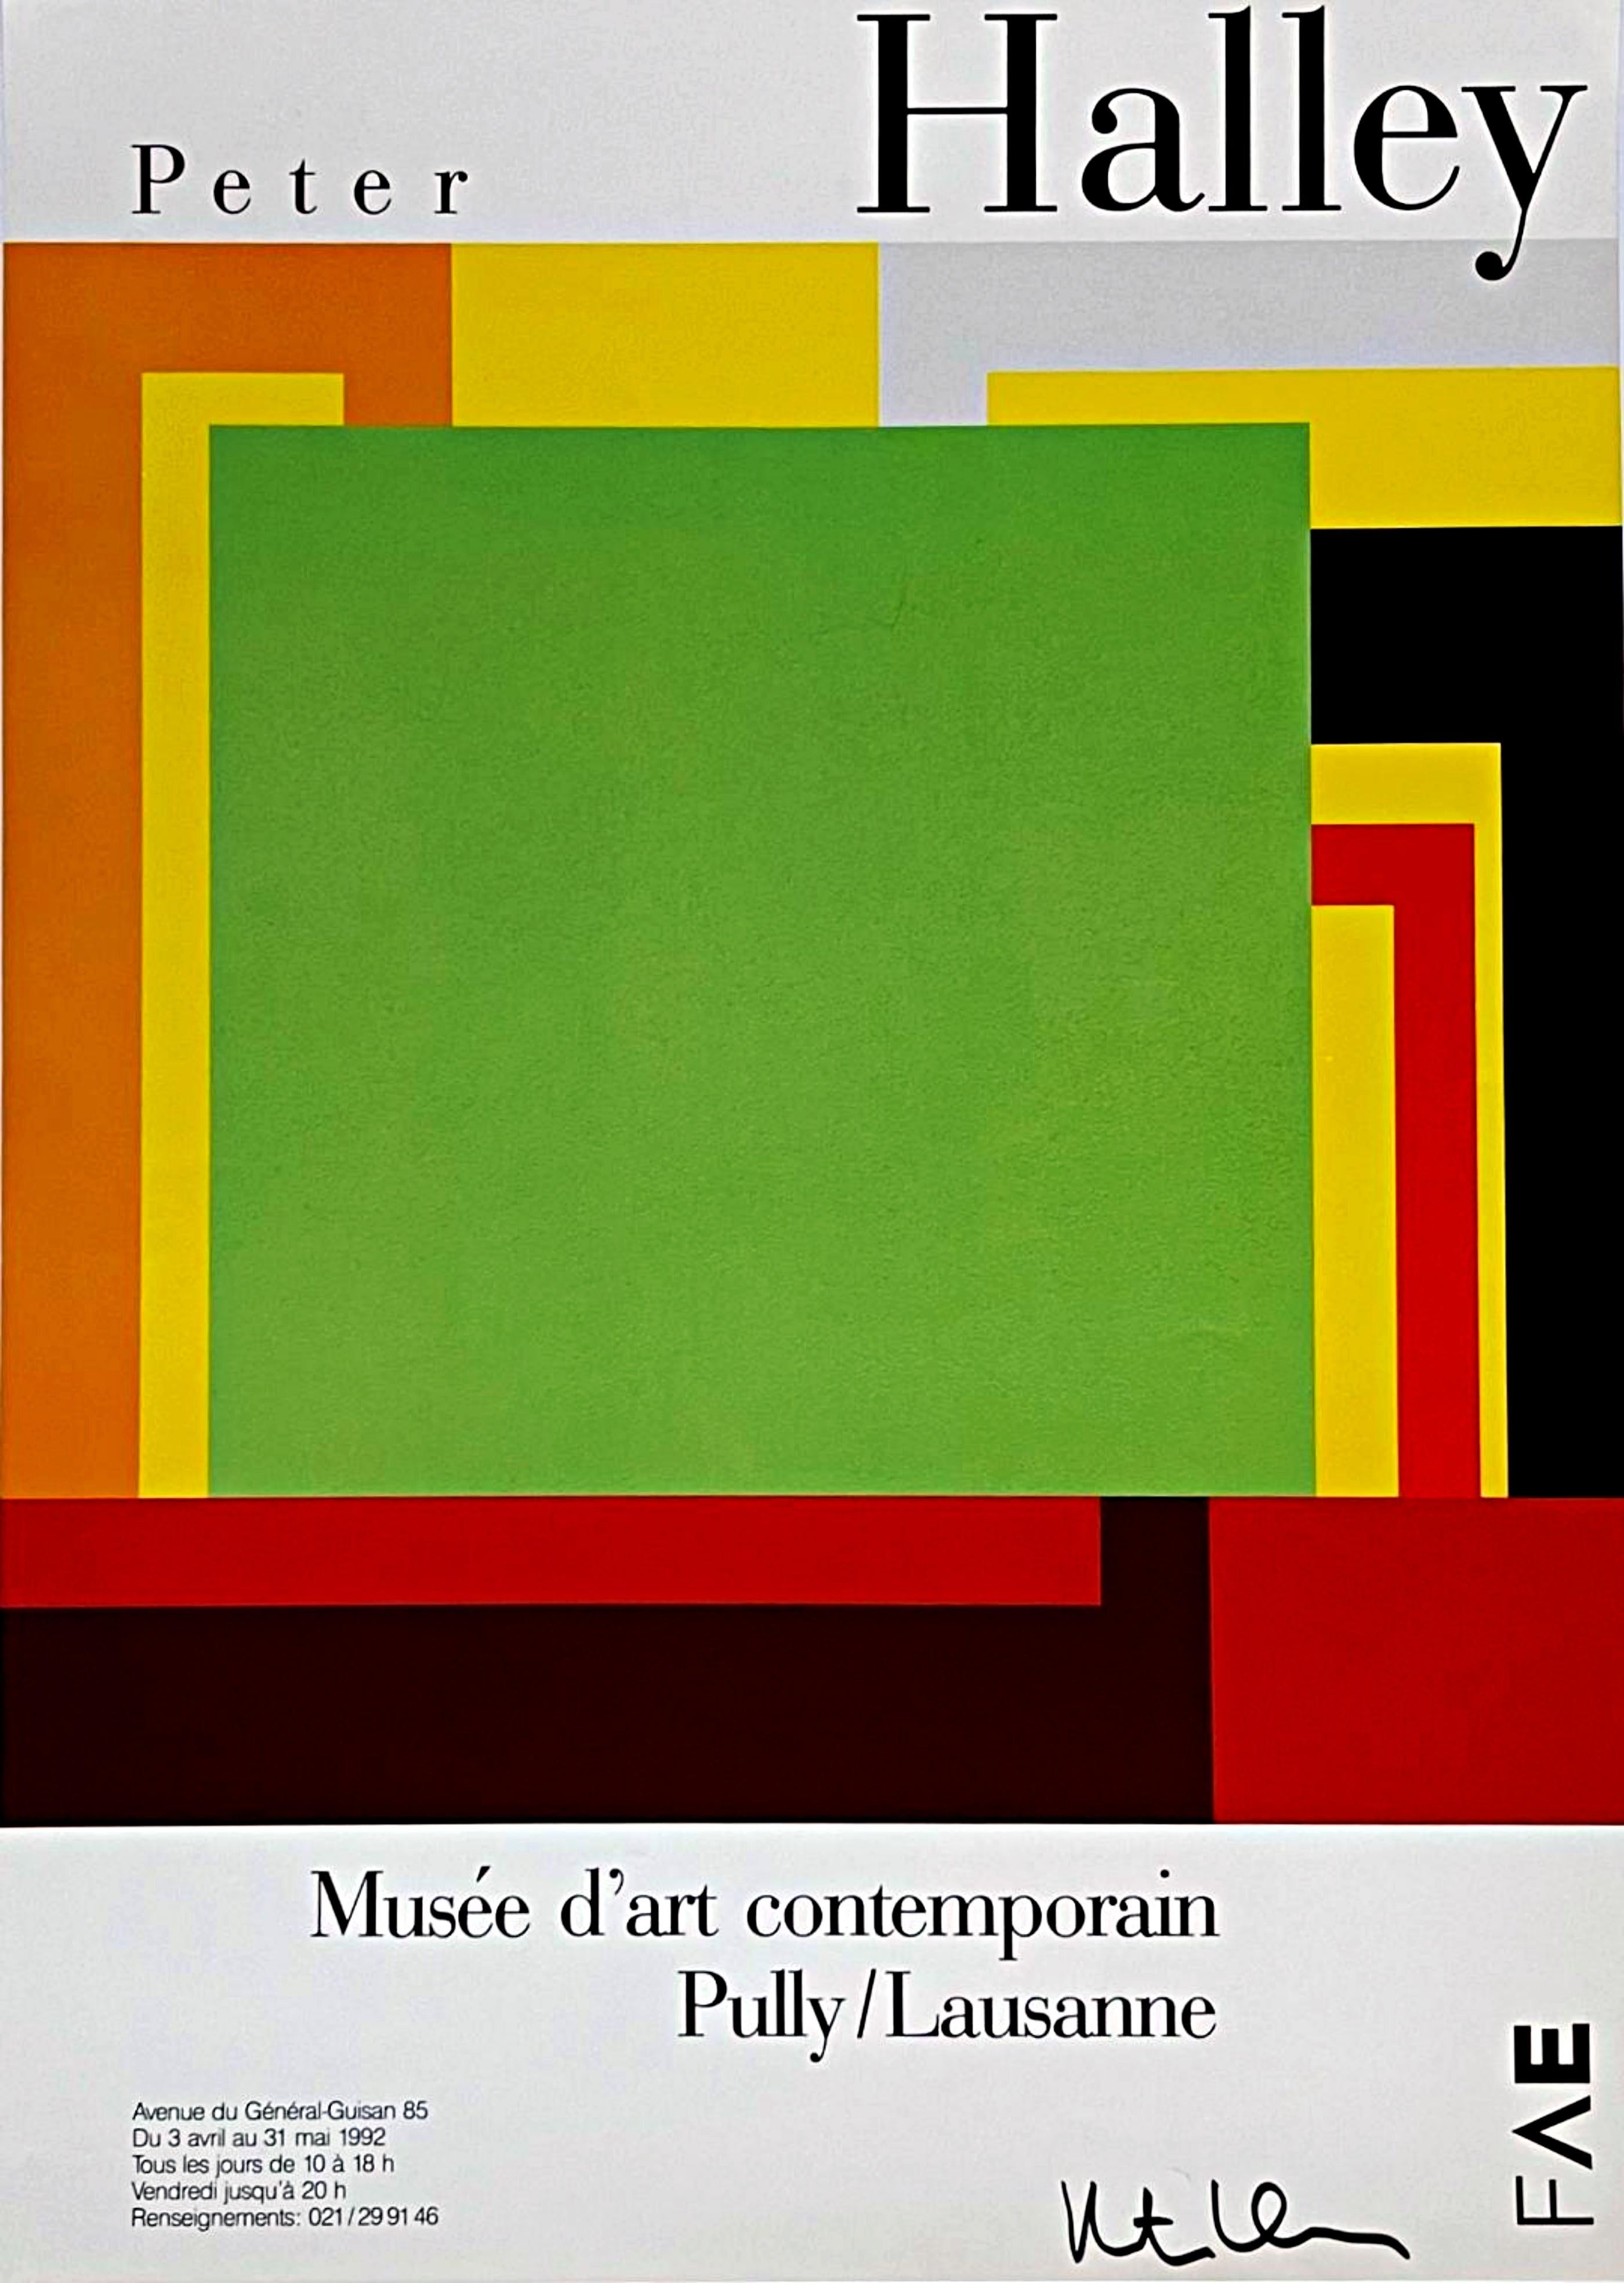 Peter Halley Abstract Print - Musee d'Art Contemporain Pully/Lausanne (Hand Signed)